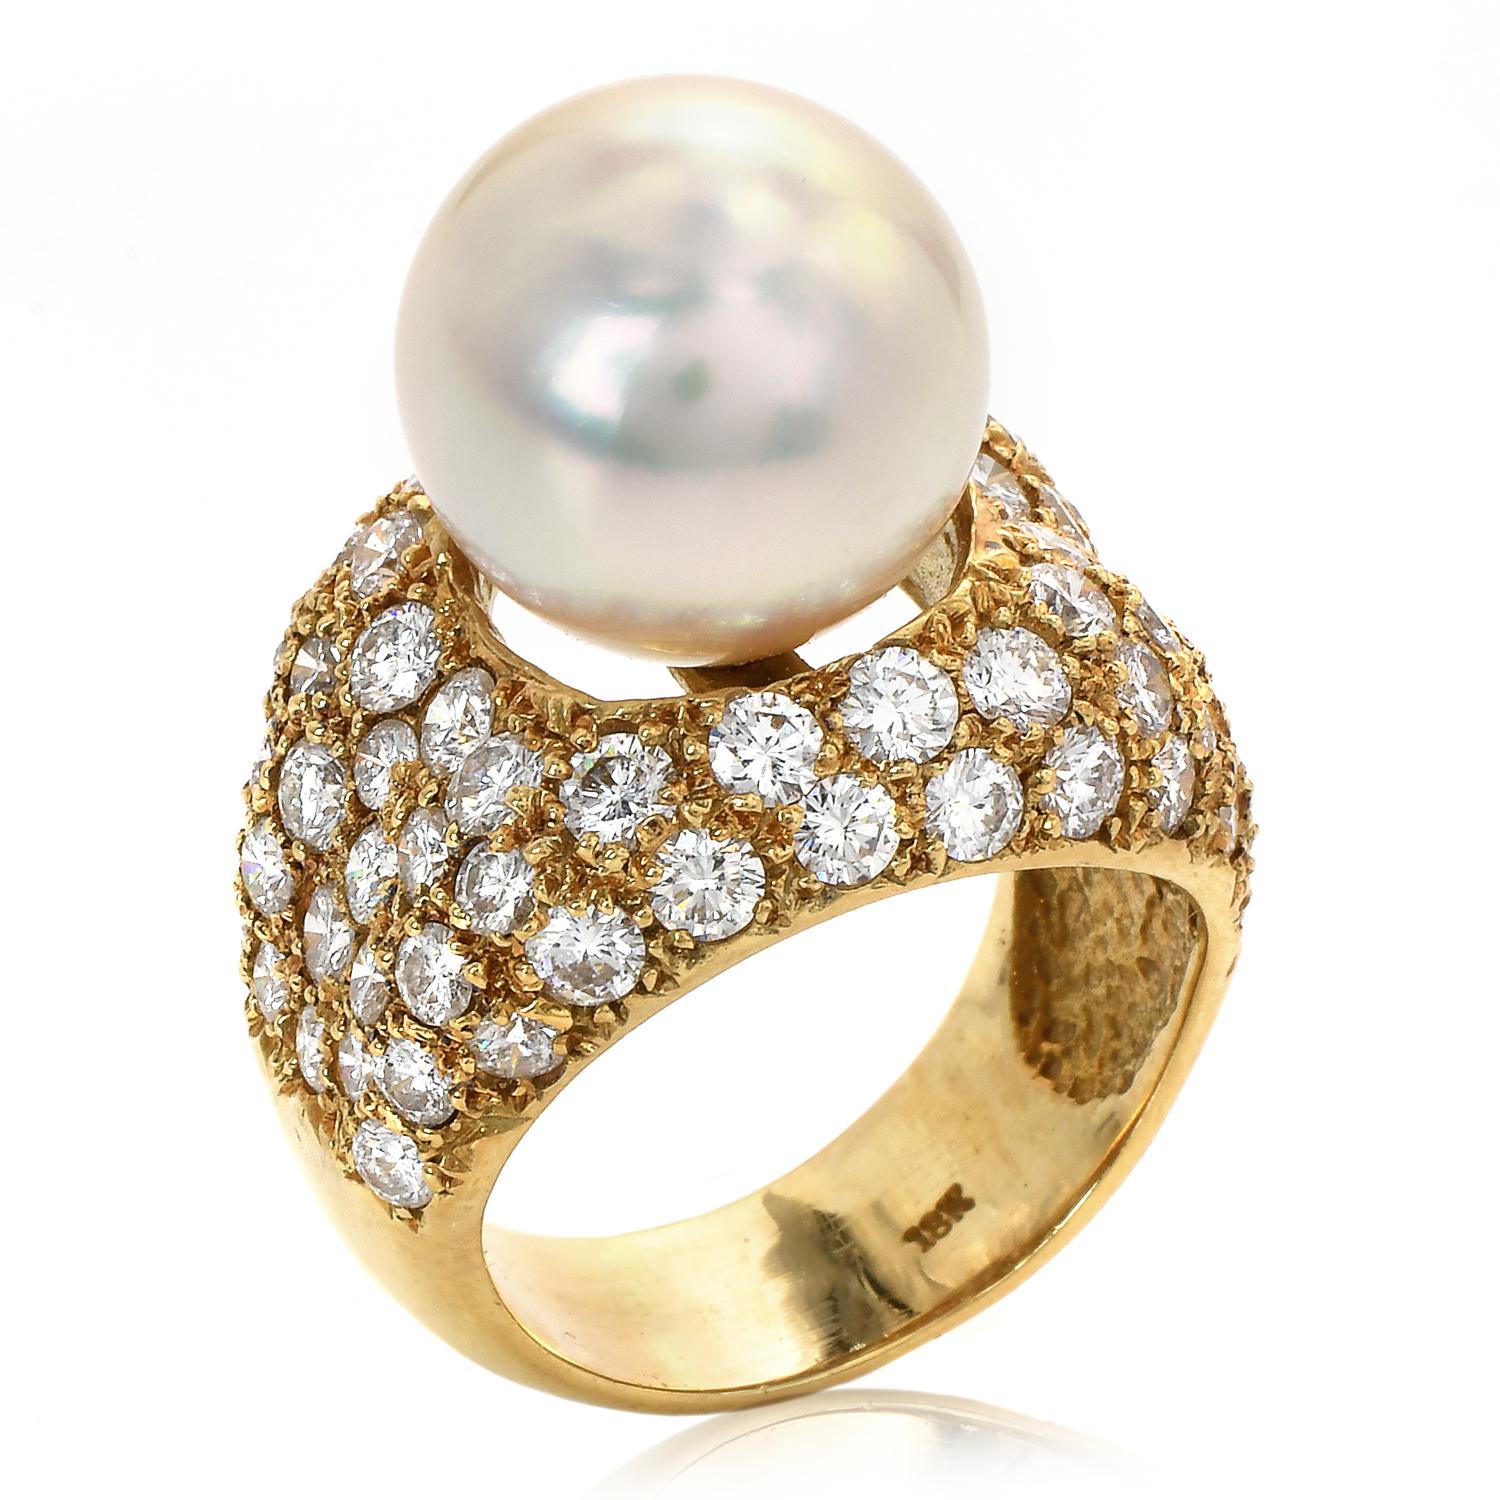 Retro Vintage 5.50ct Diamond South Sea Pearl 18k Yellow Gold Pave Cocktail Ring In Excellent Condition For Sale In Miami, FL